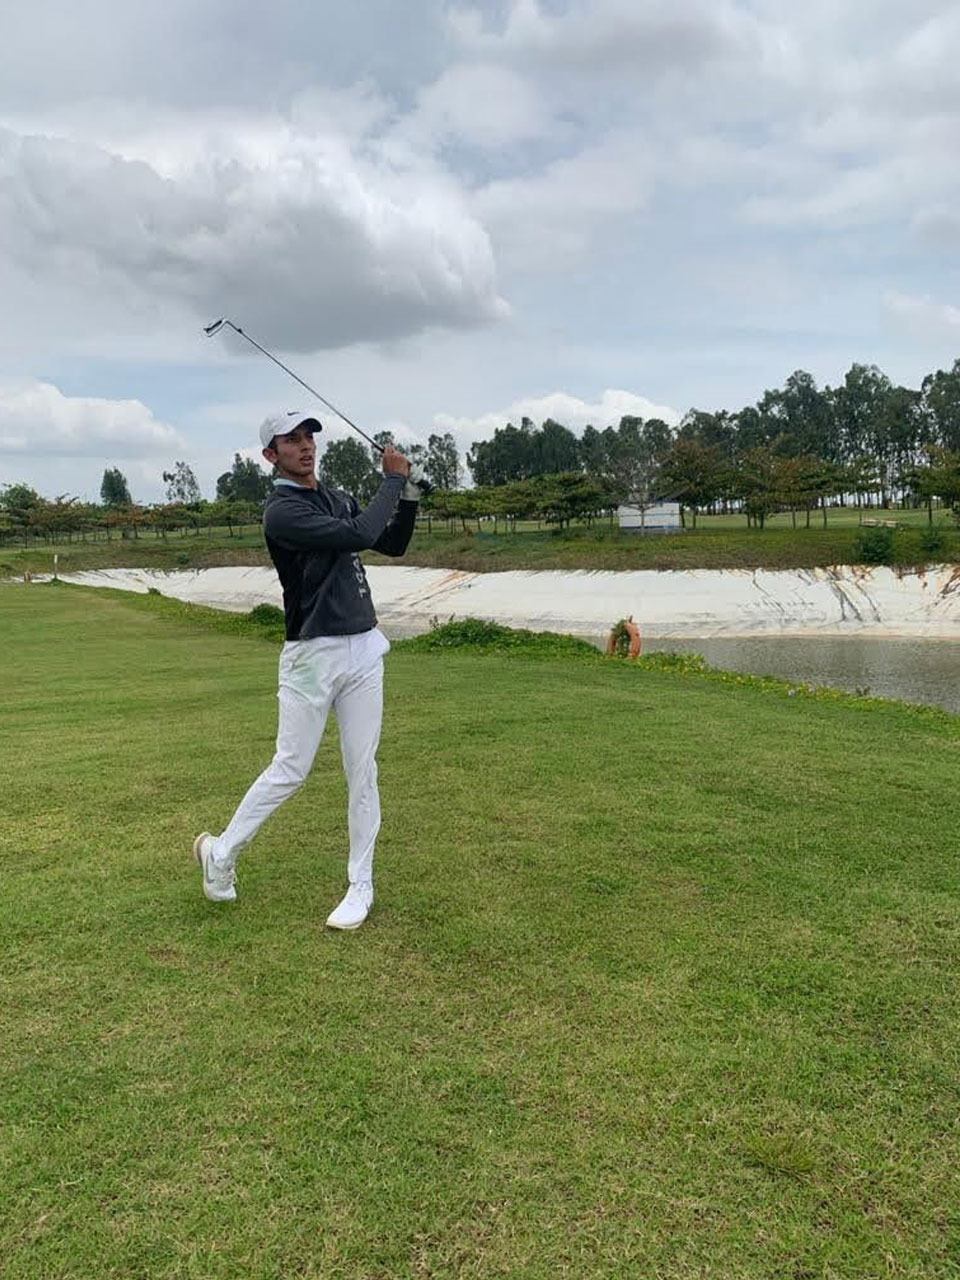 Sumit Kotwal finishes 4th at the Southern India Junior Boys Championship